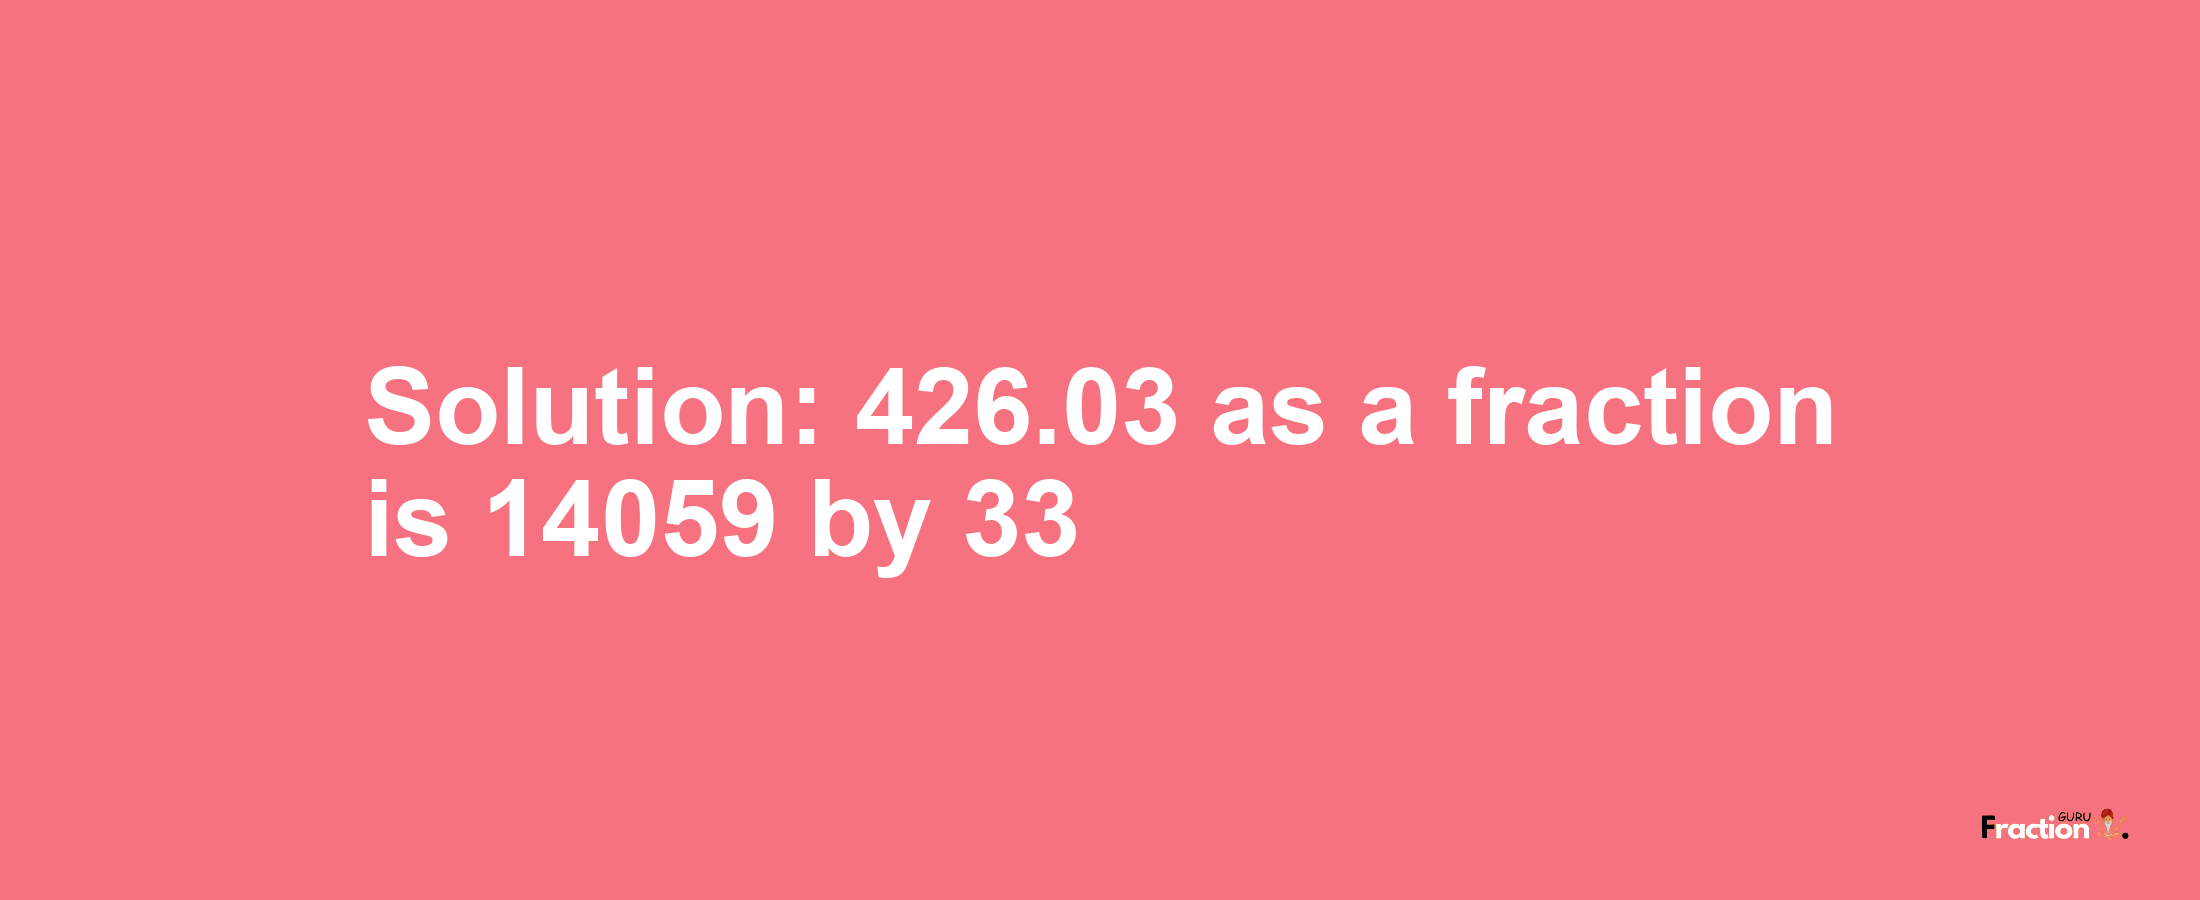 Solution:426.03 as a fraction is 14059/33